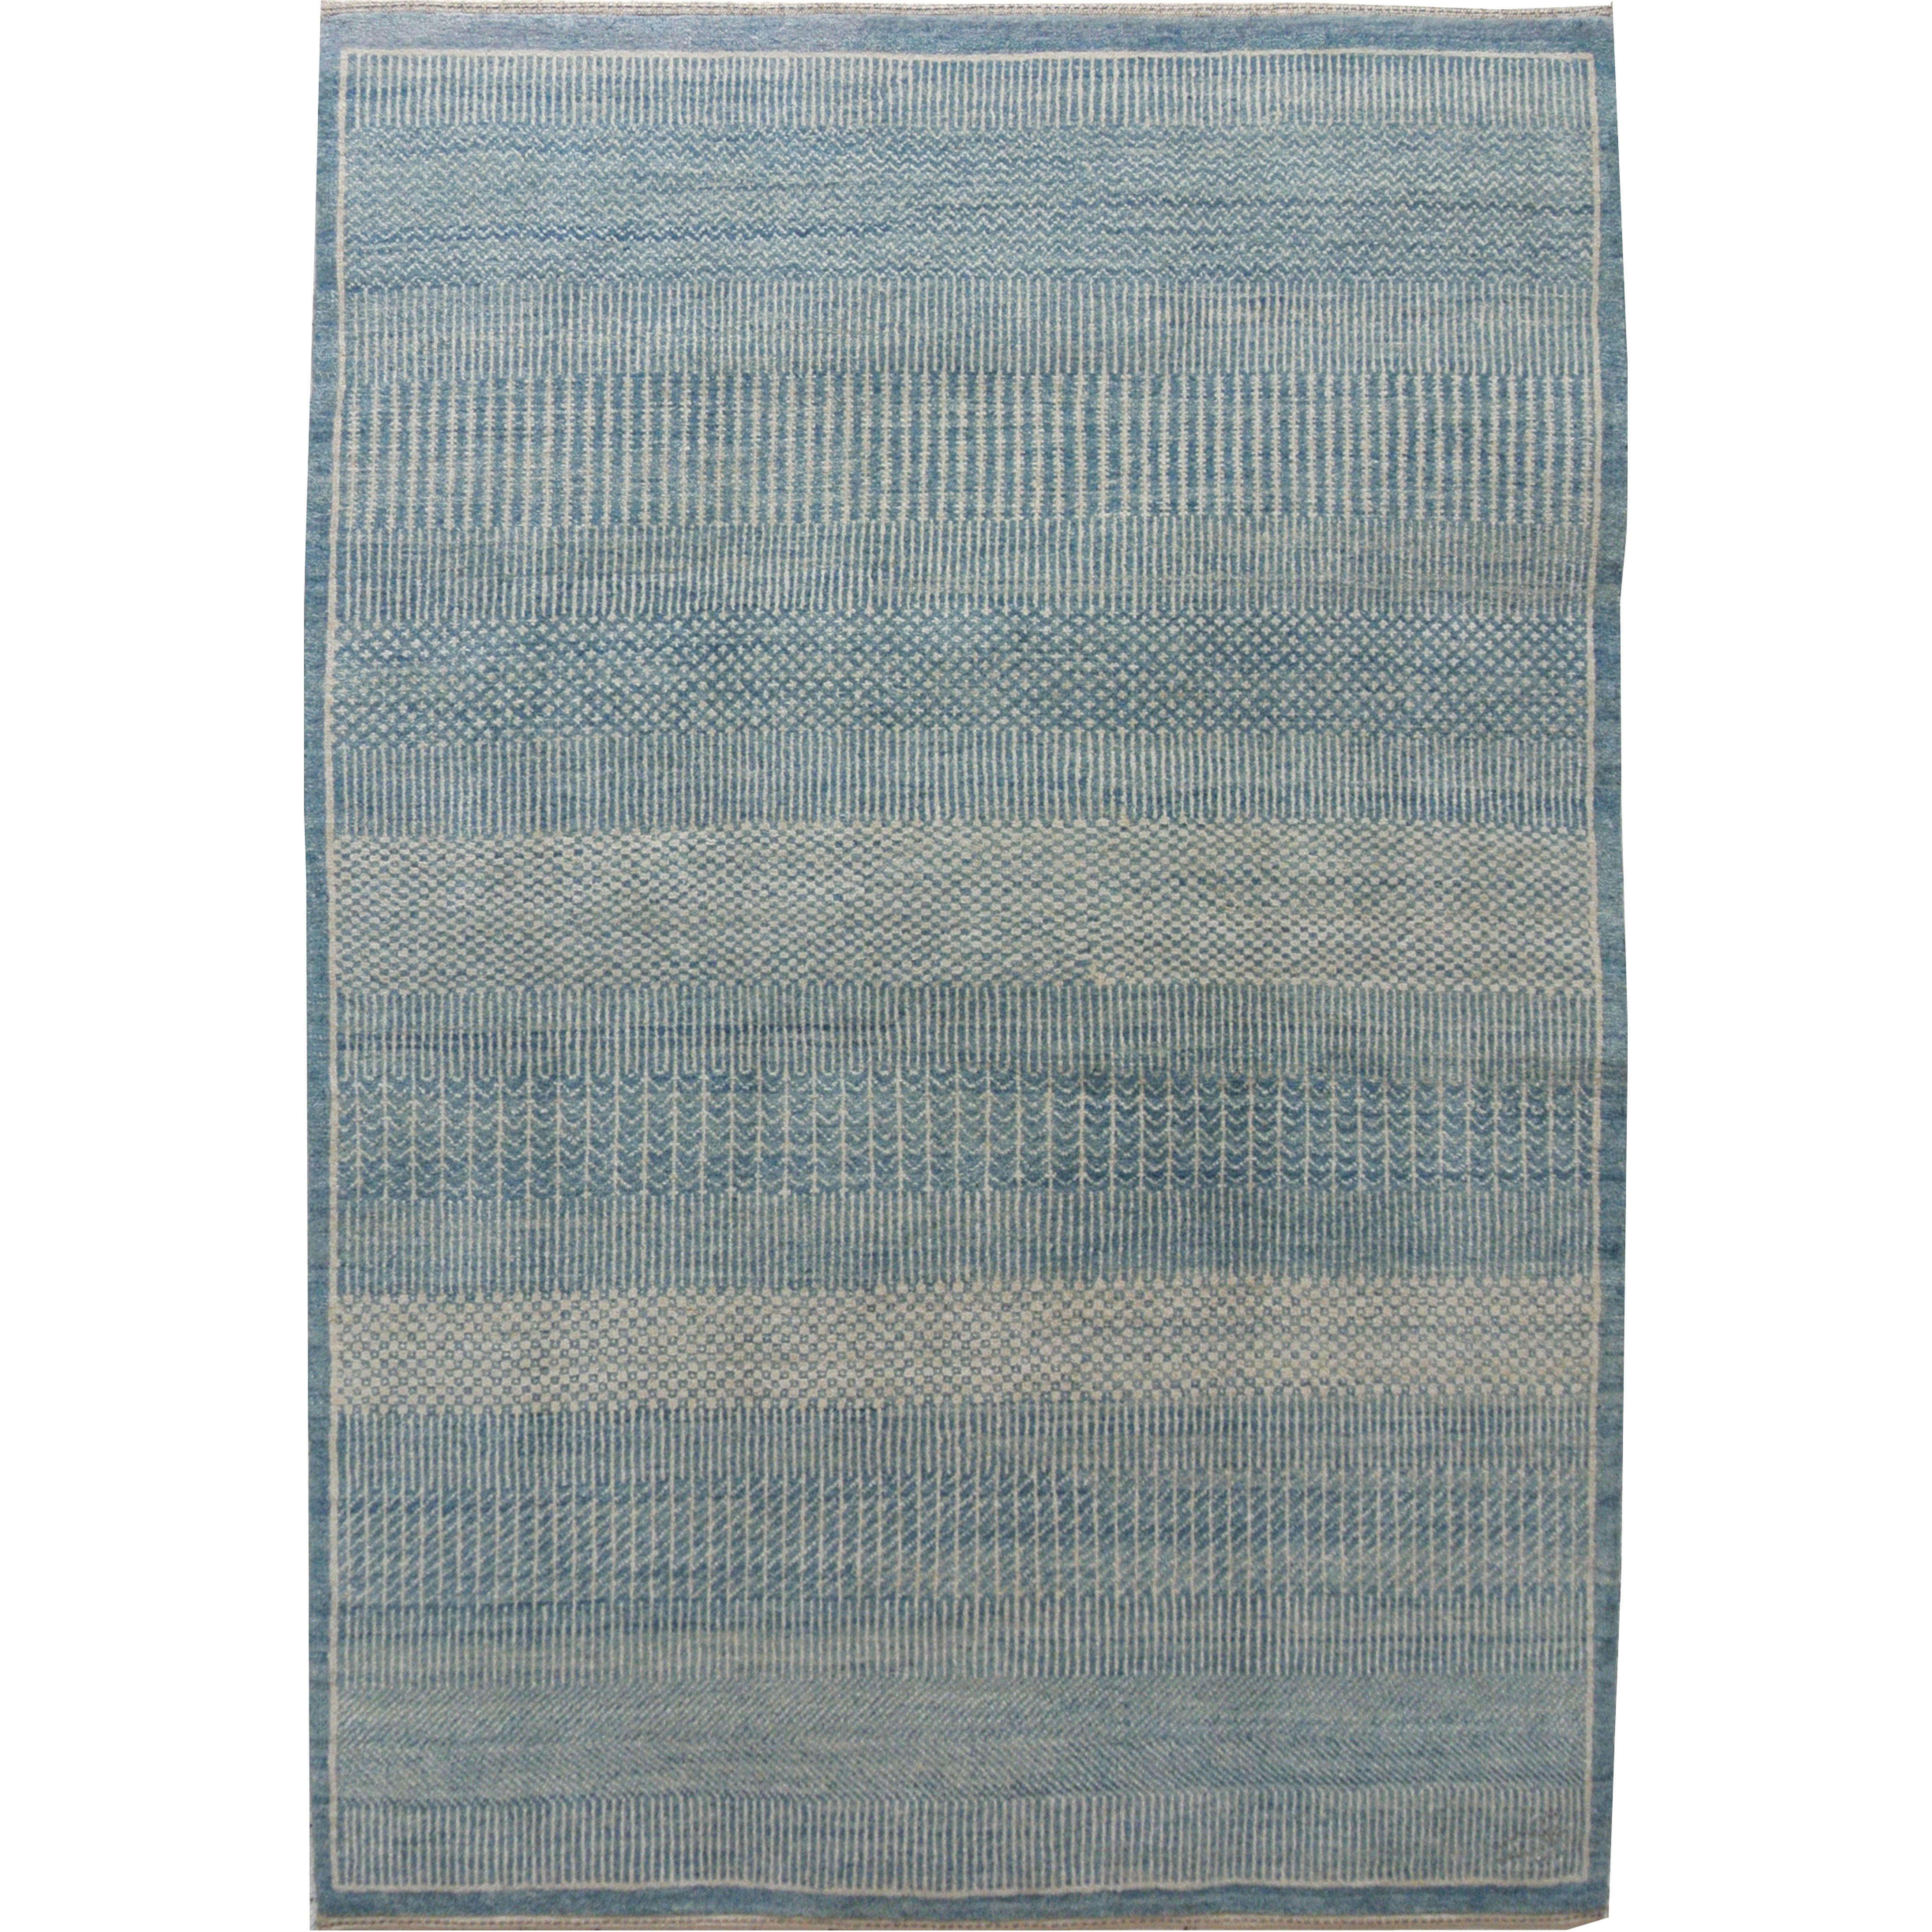 Contemporary Wool Persian Rug, Blue and Cream, Orley Shabahang, 5' x 7' For Sale